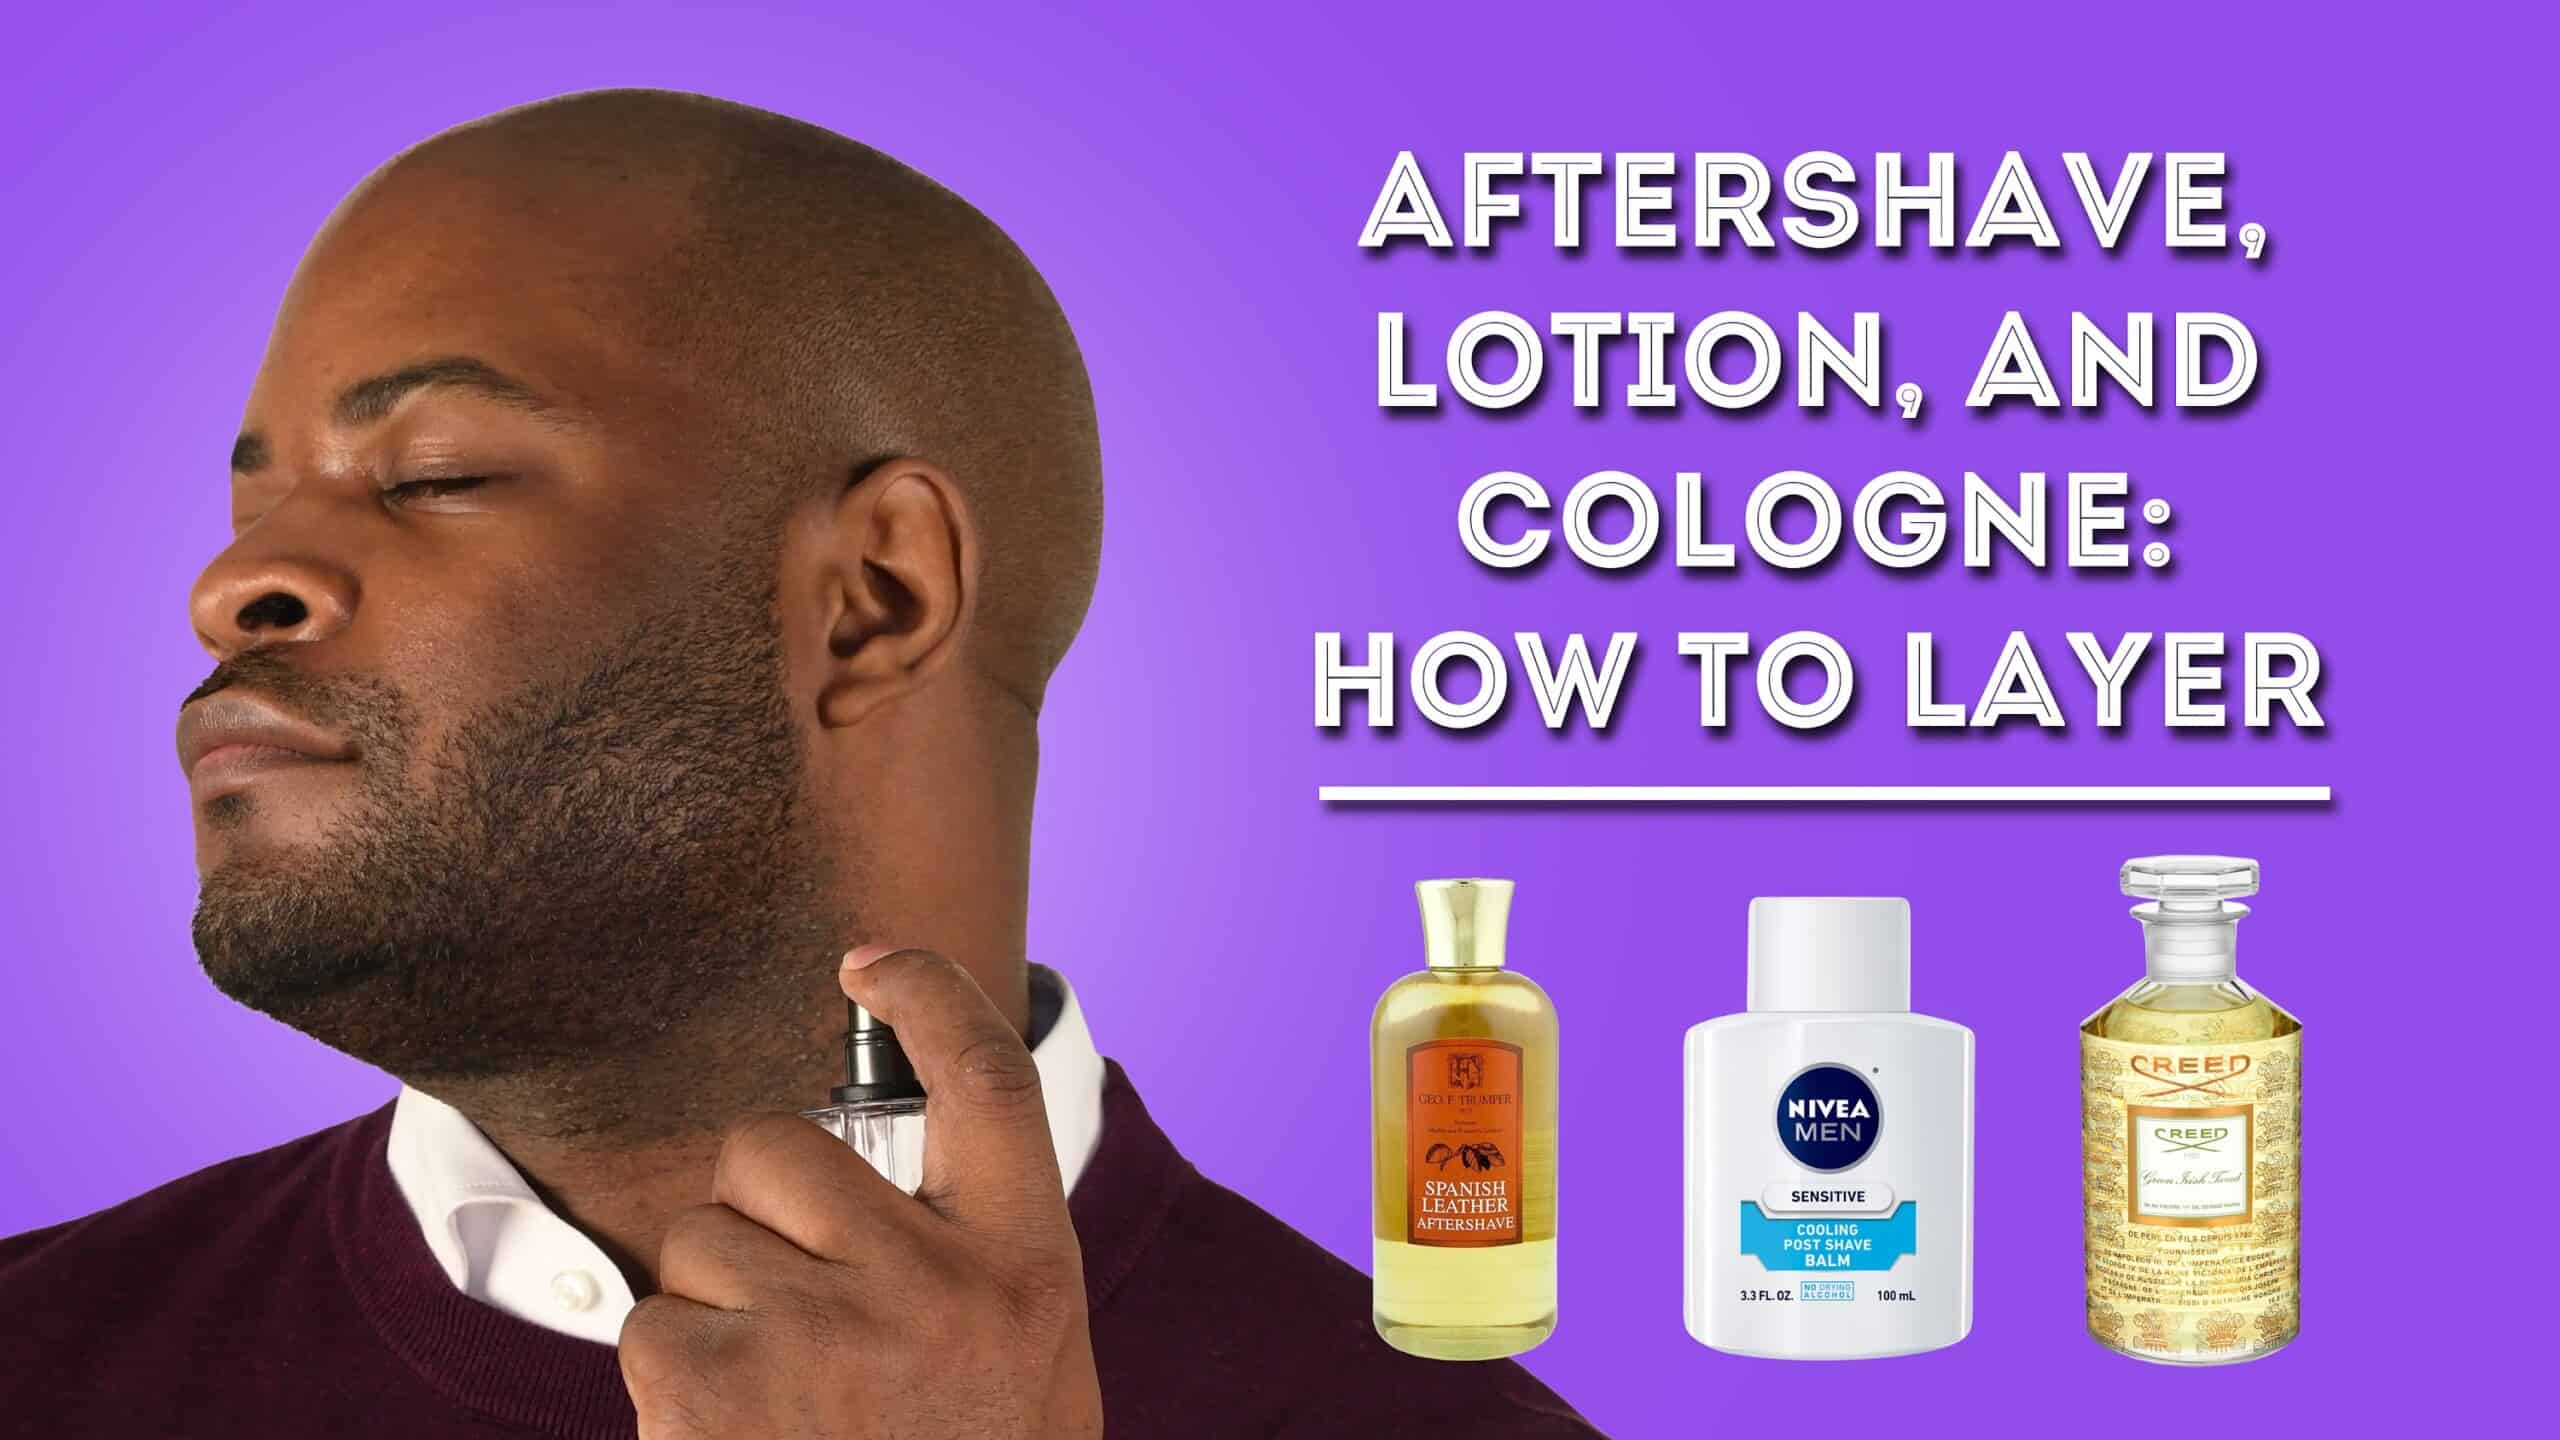 Aftershave, Lotion, And Cologne: How To Layer - Men's Fragrance